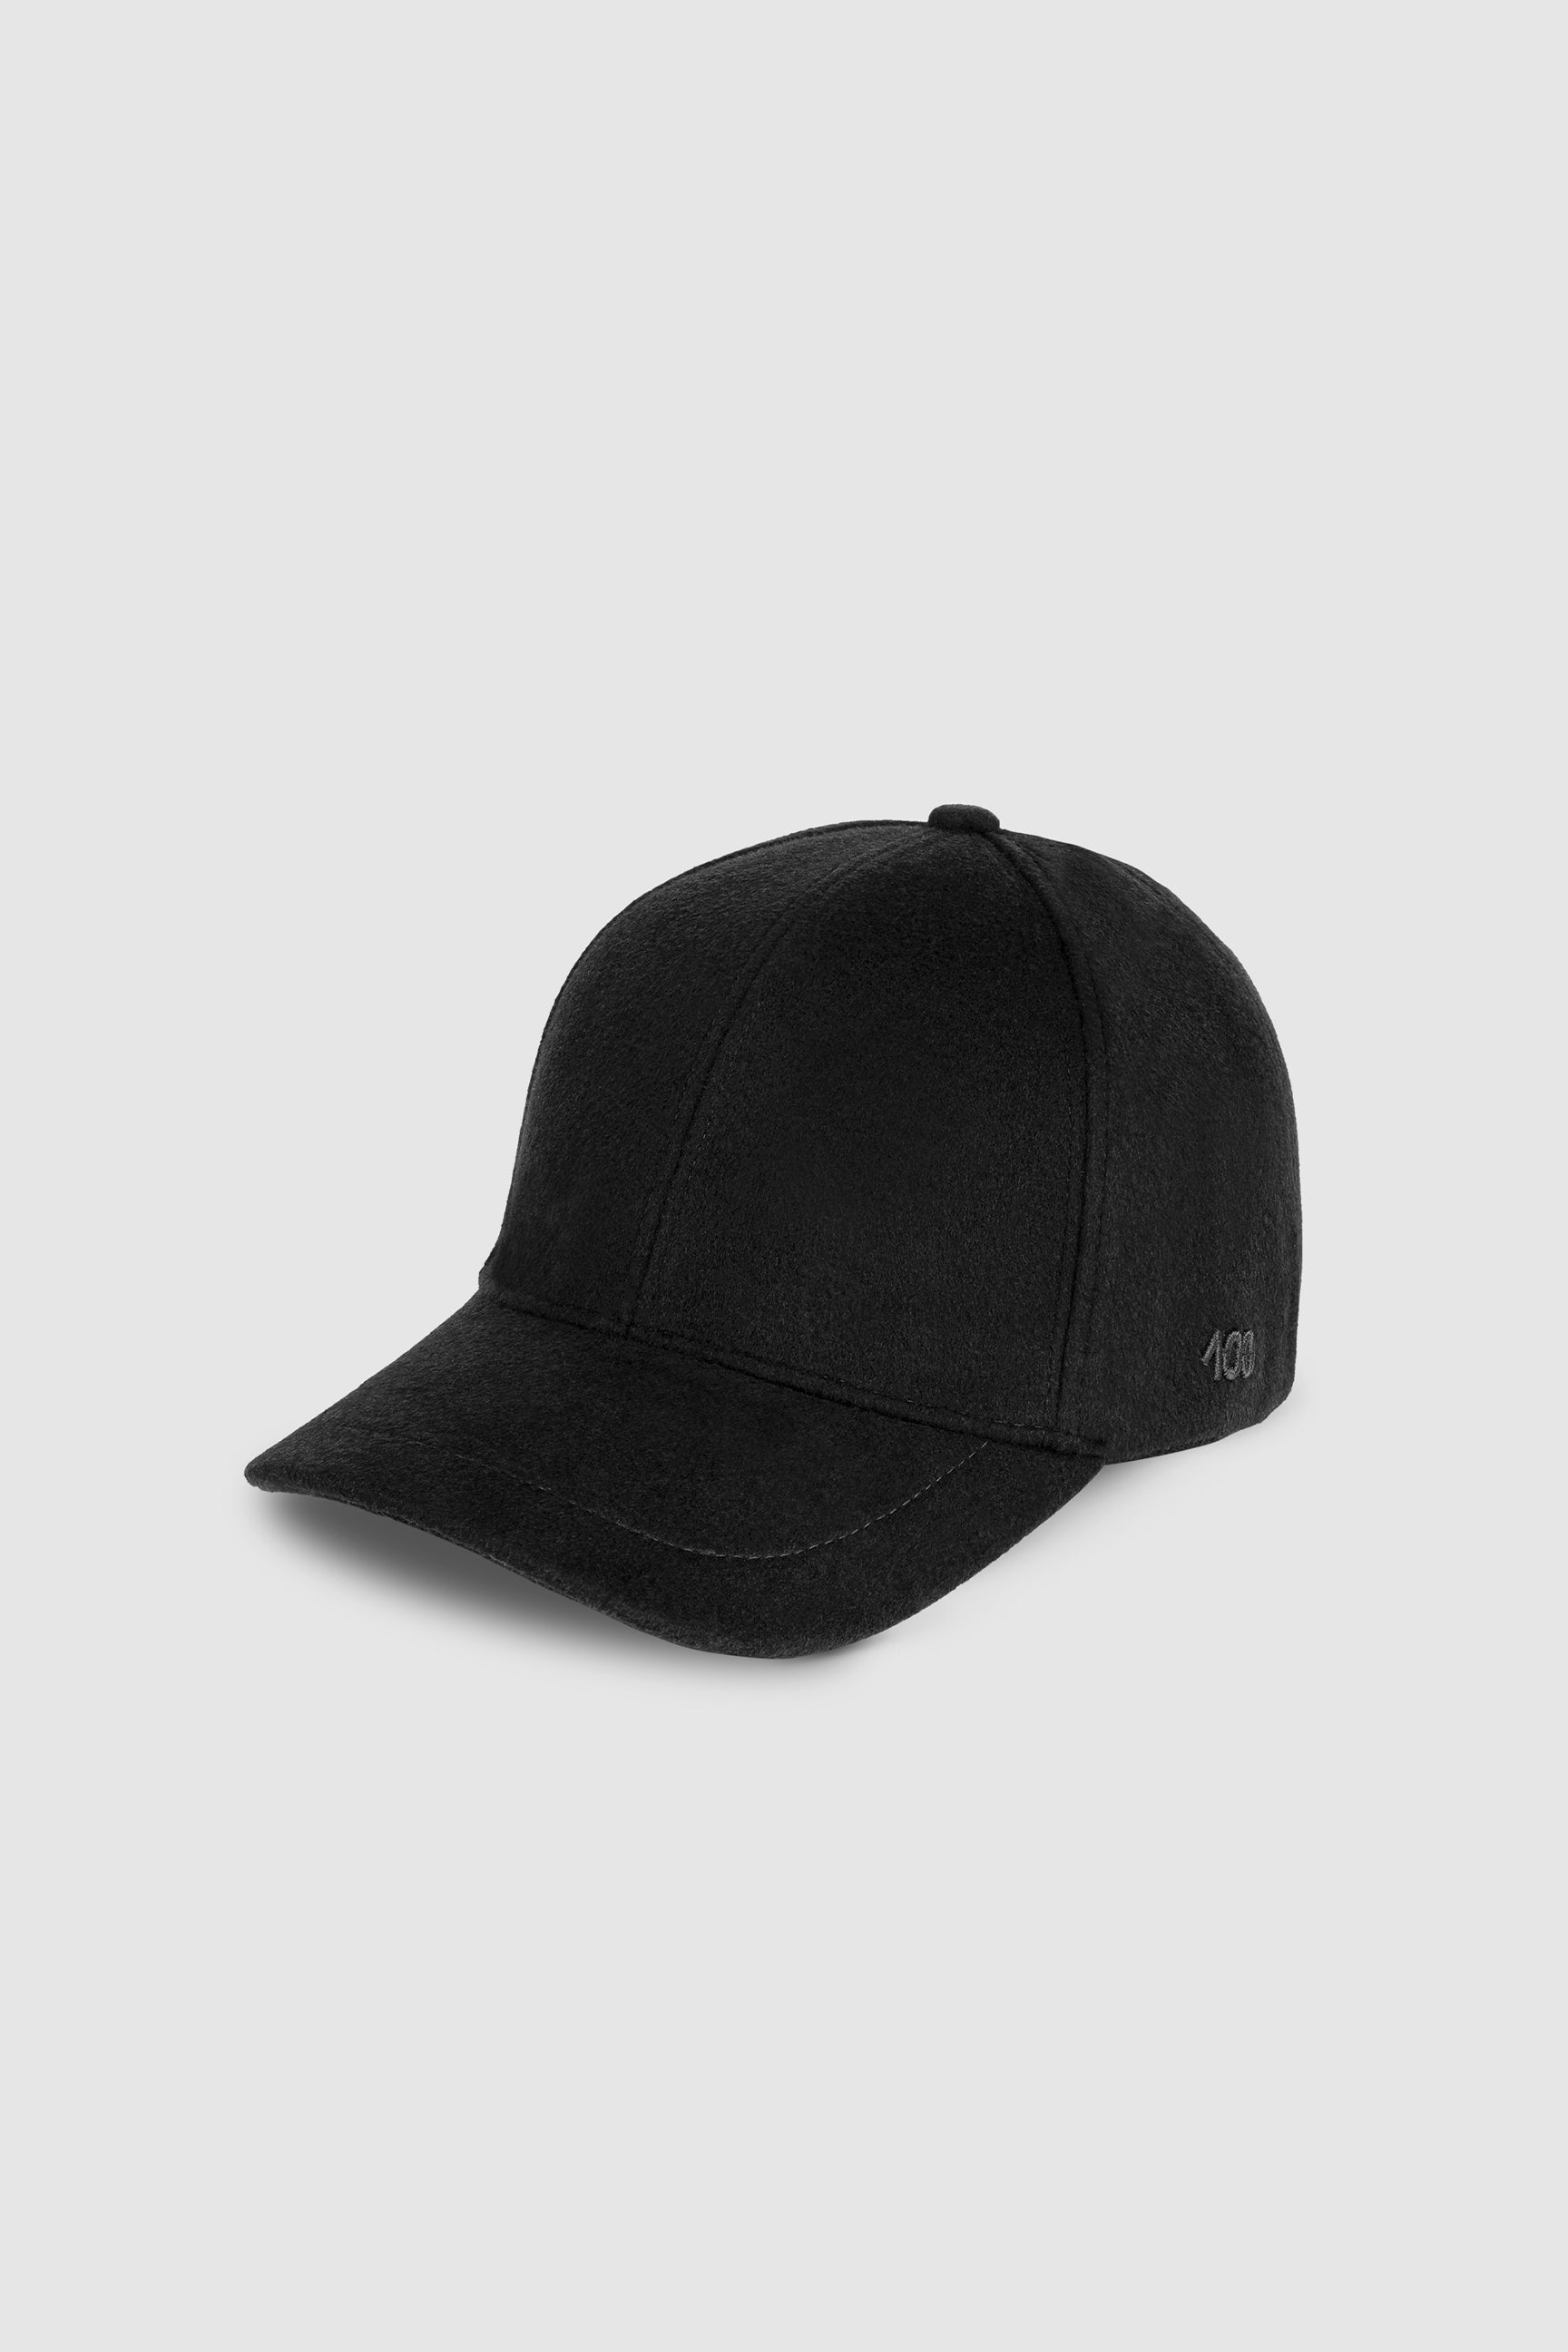 The 100 Cap in Black Cashmere (Black (599) / One Size)